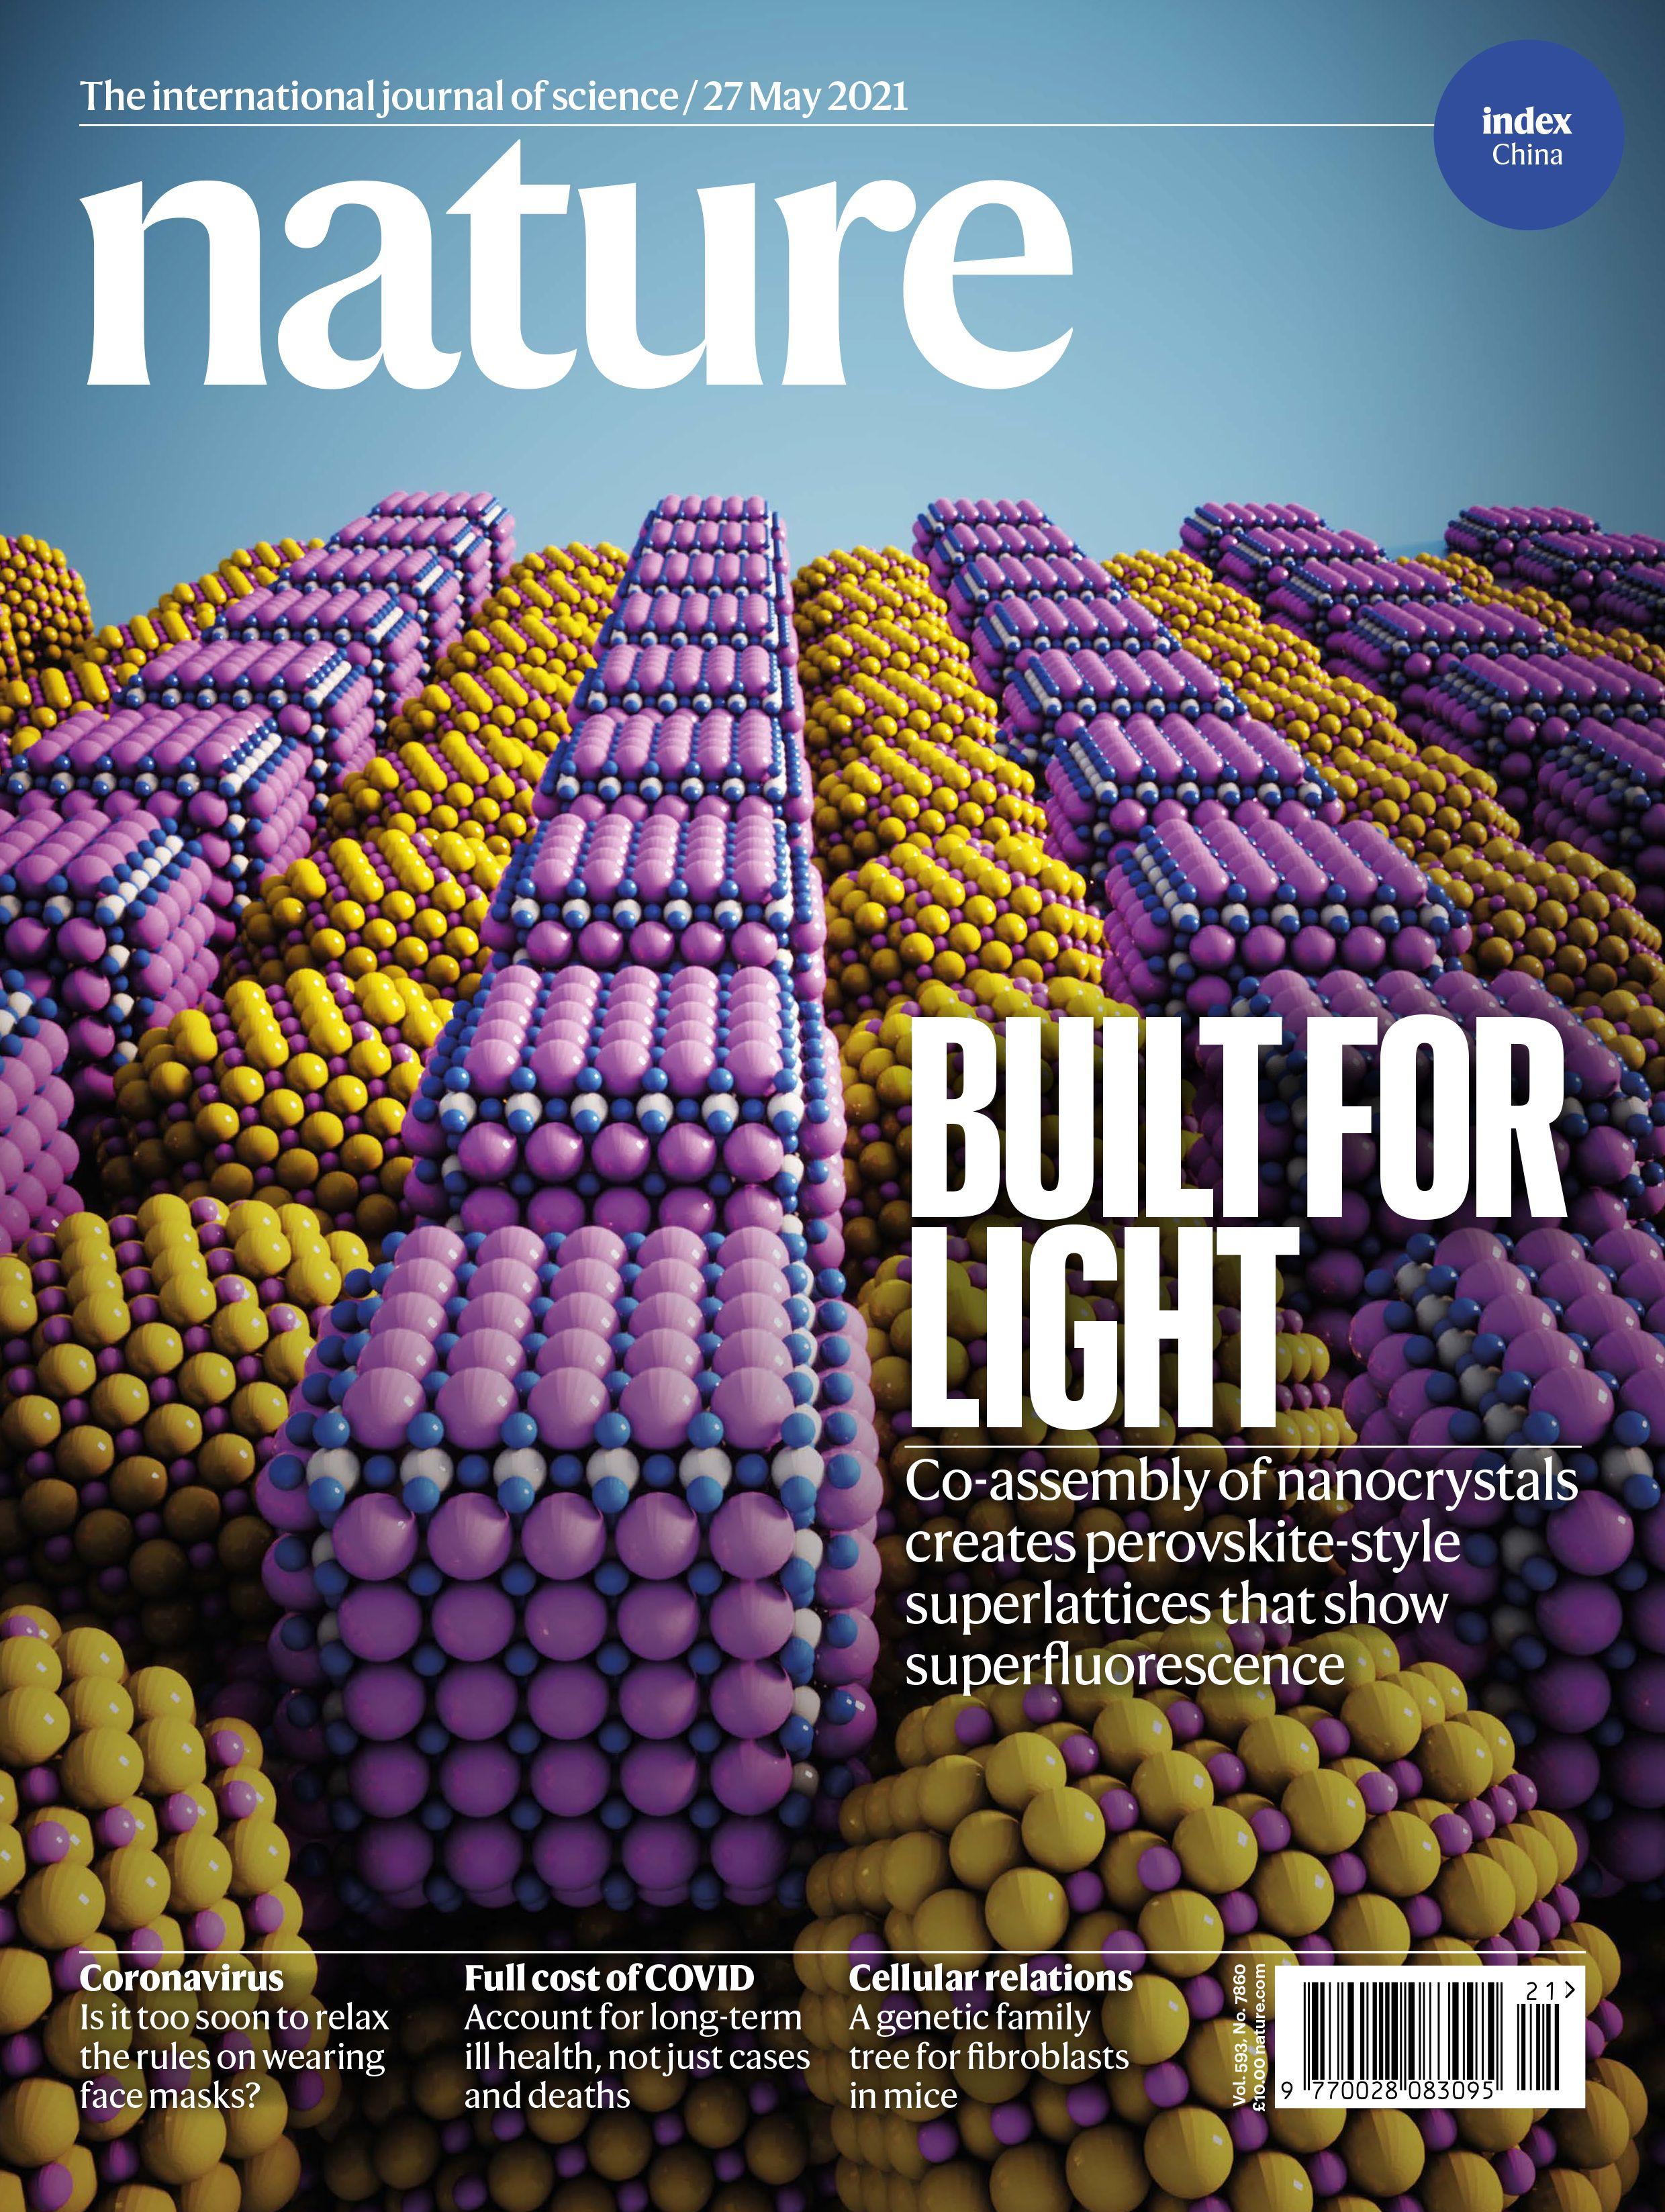 May 27, 2021 issue cover story: "Perovskite-type superlattices from lead-halide perovskite nanocubes" (Credit: Nature)